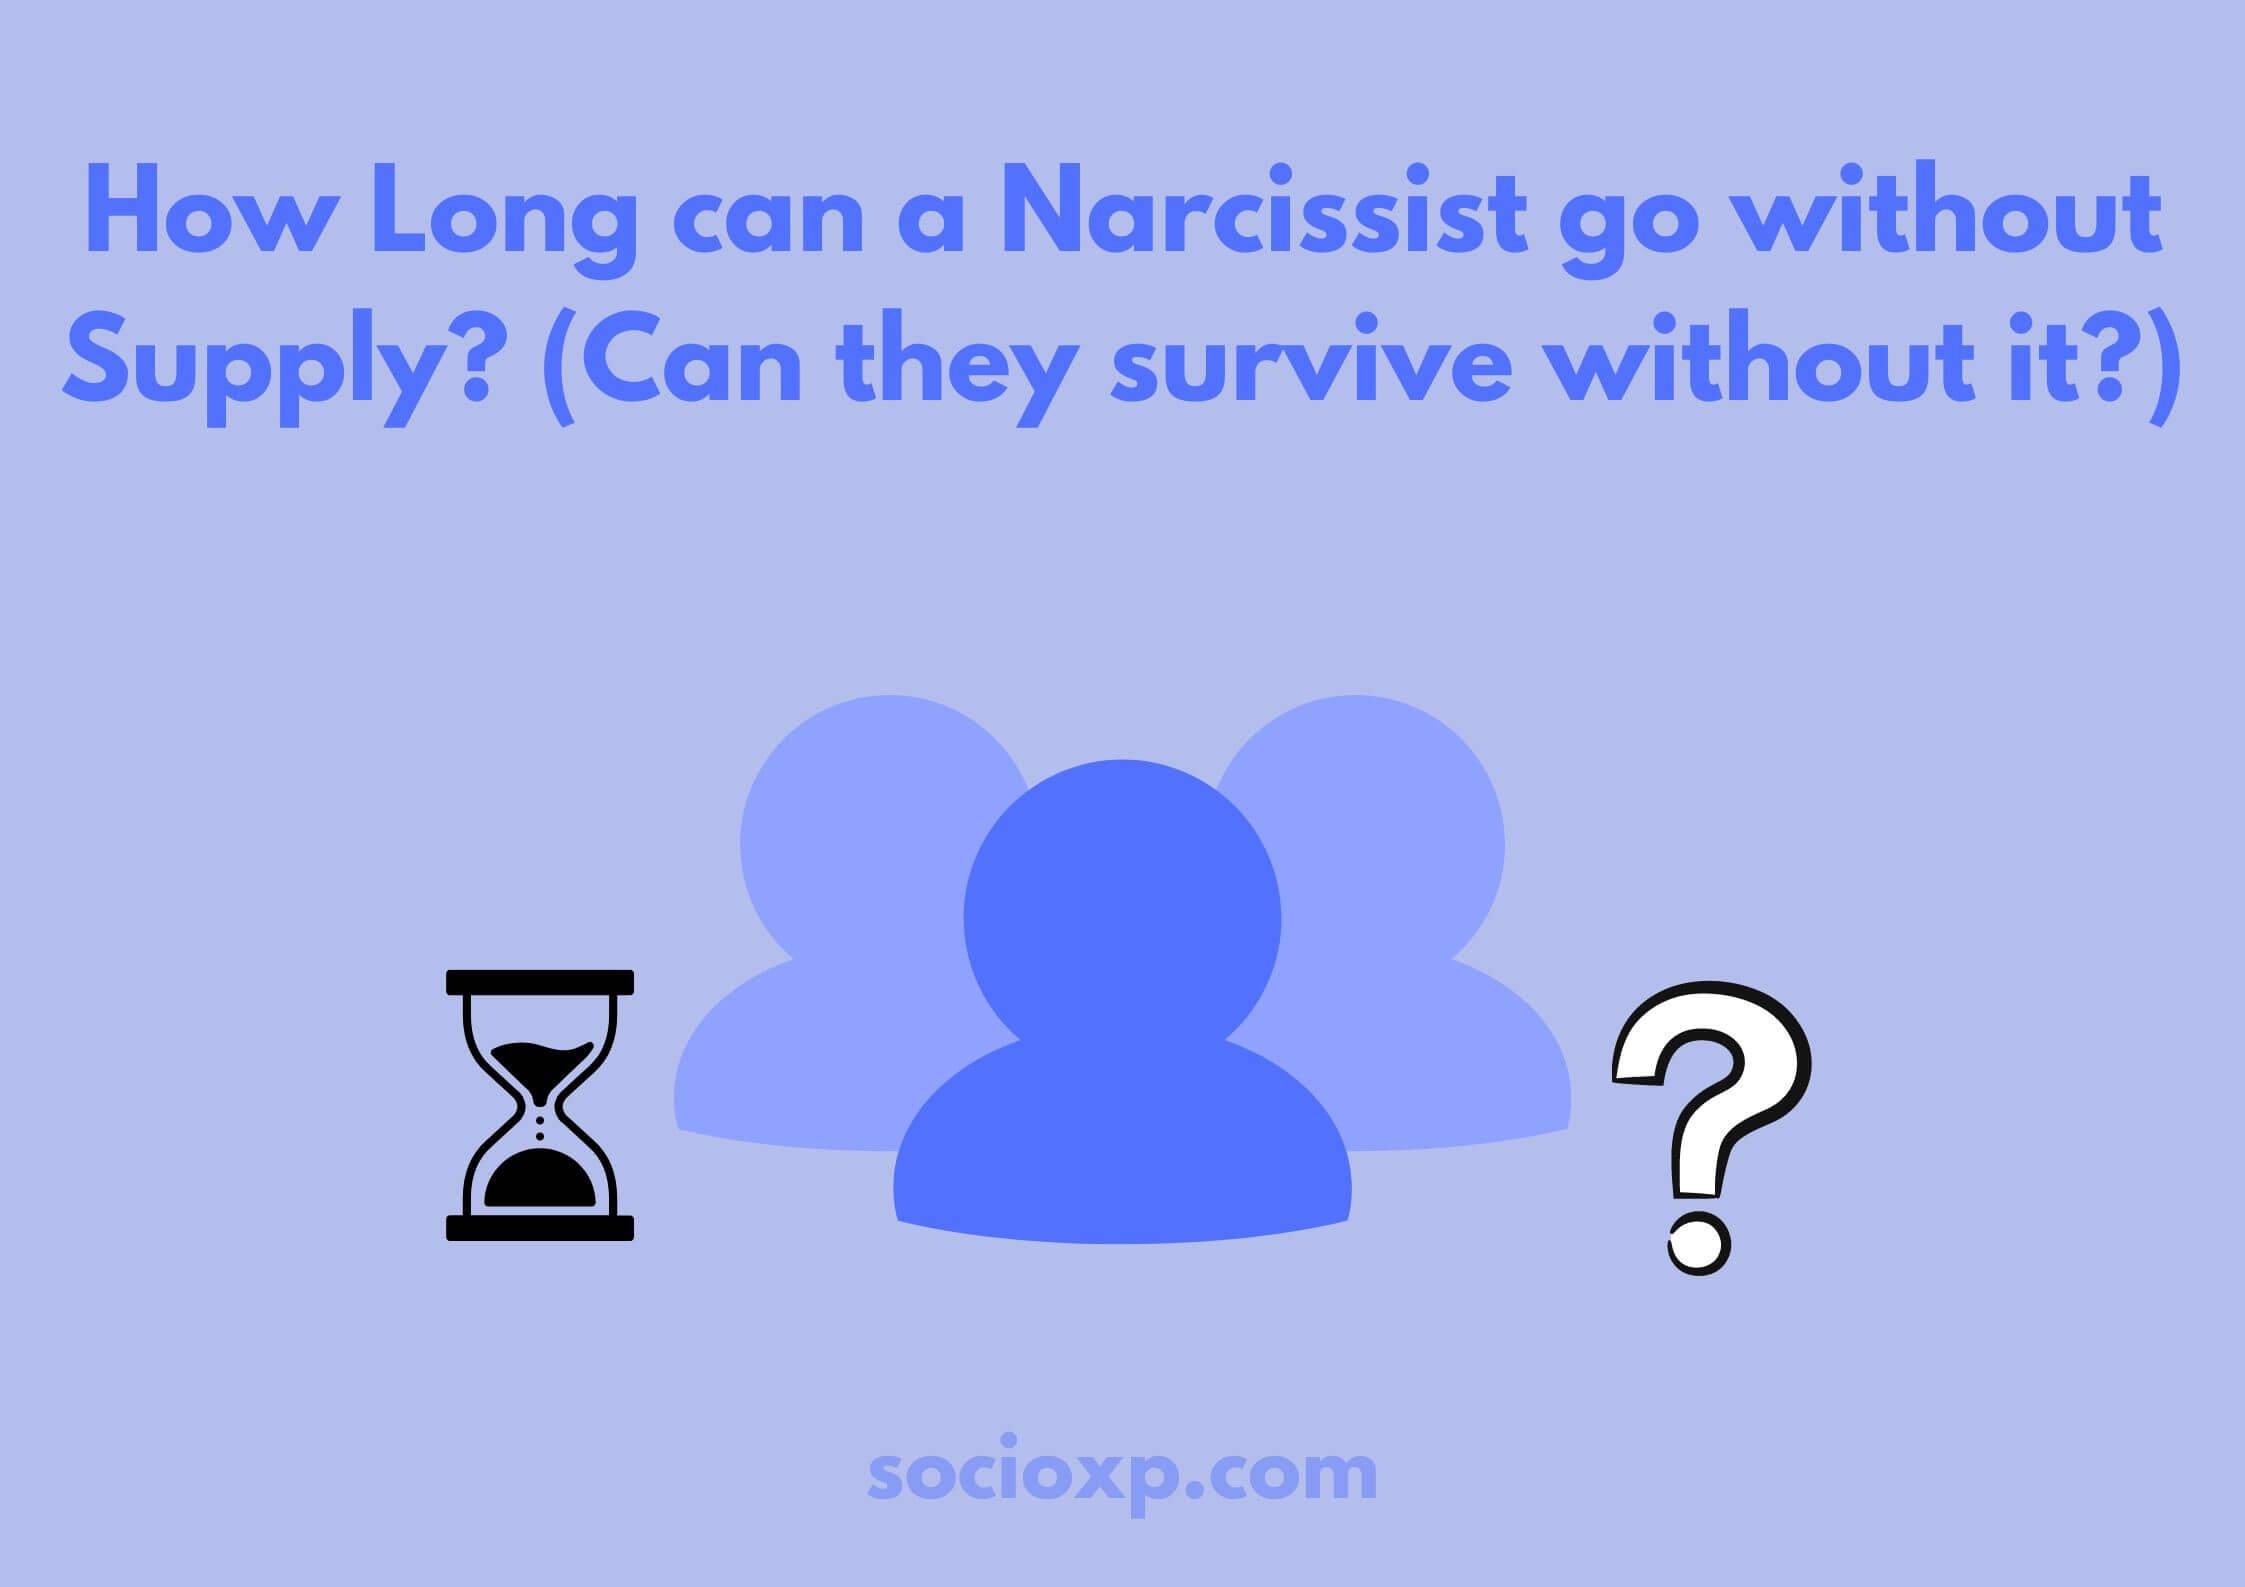 How Long Can A Narcissist Go Without Supply? (Can They Survive Without It?)